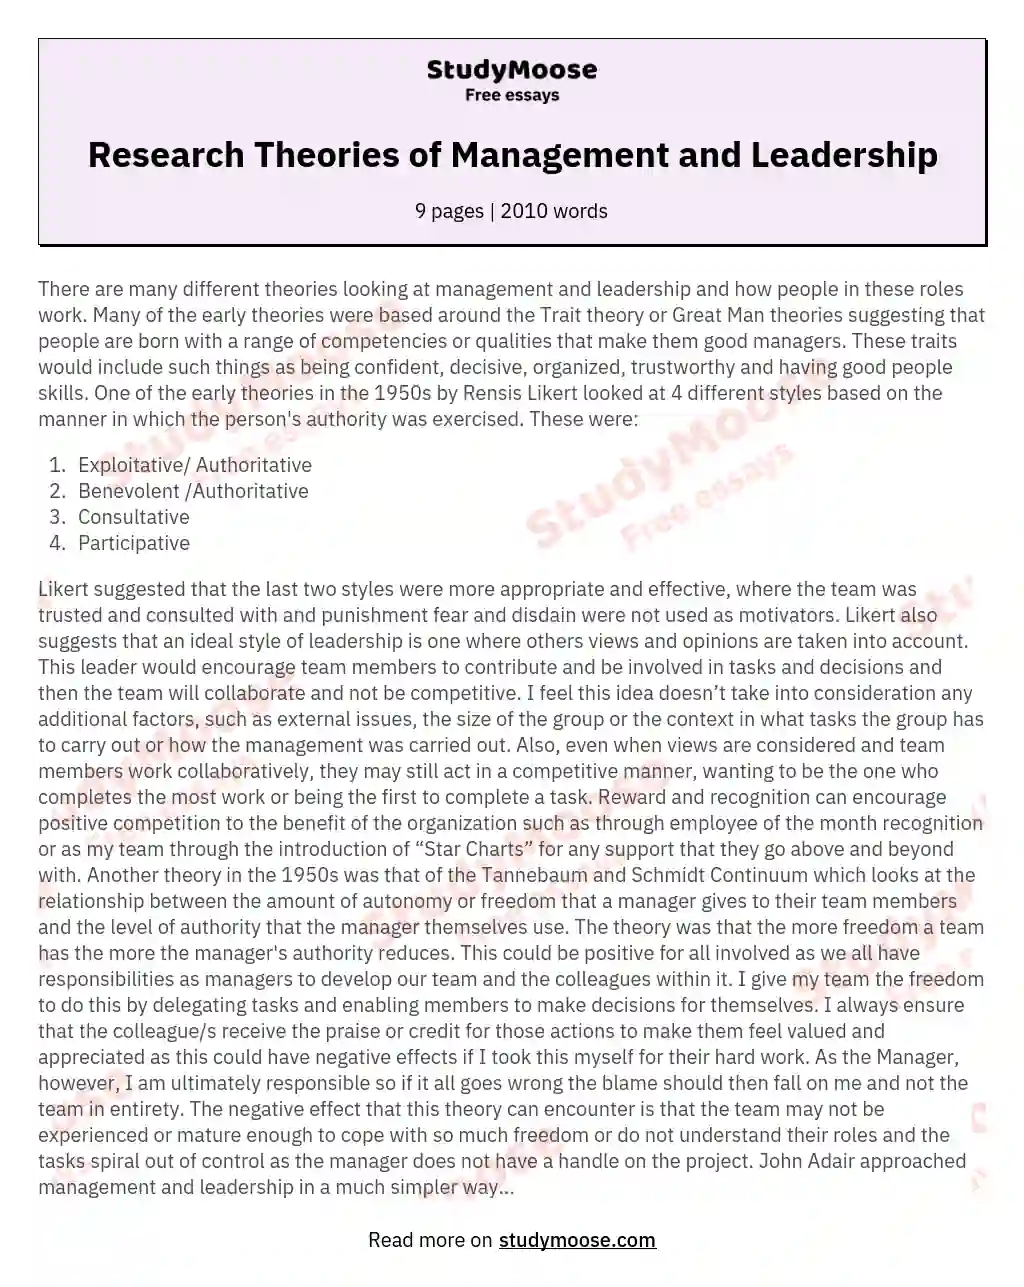 Research Theories of Management and Leadership essay